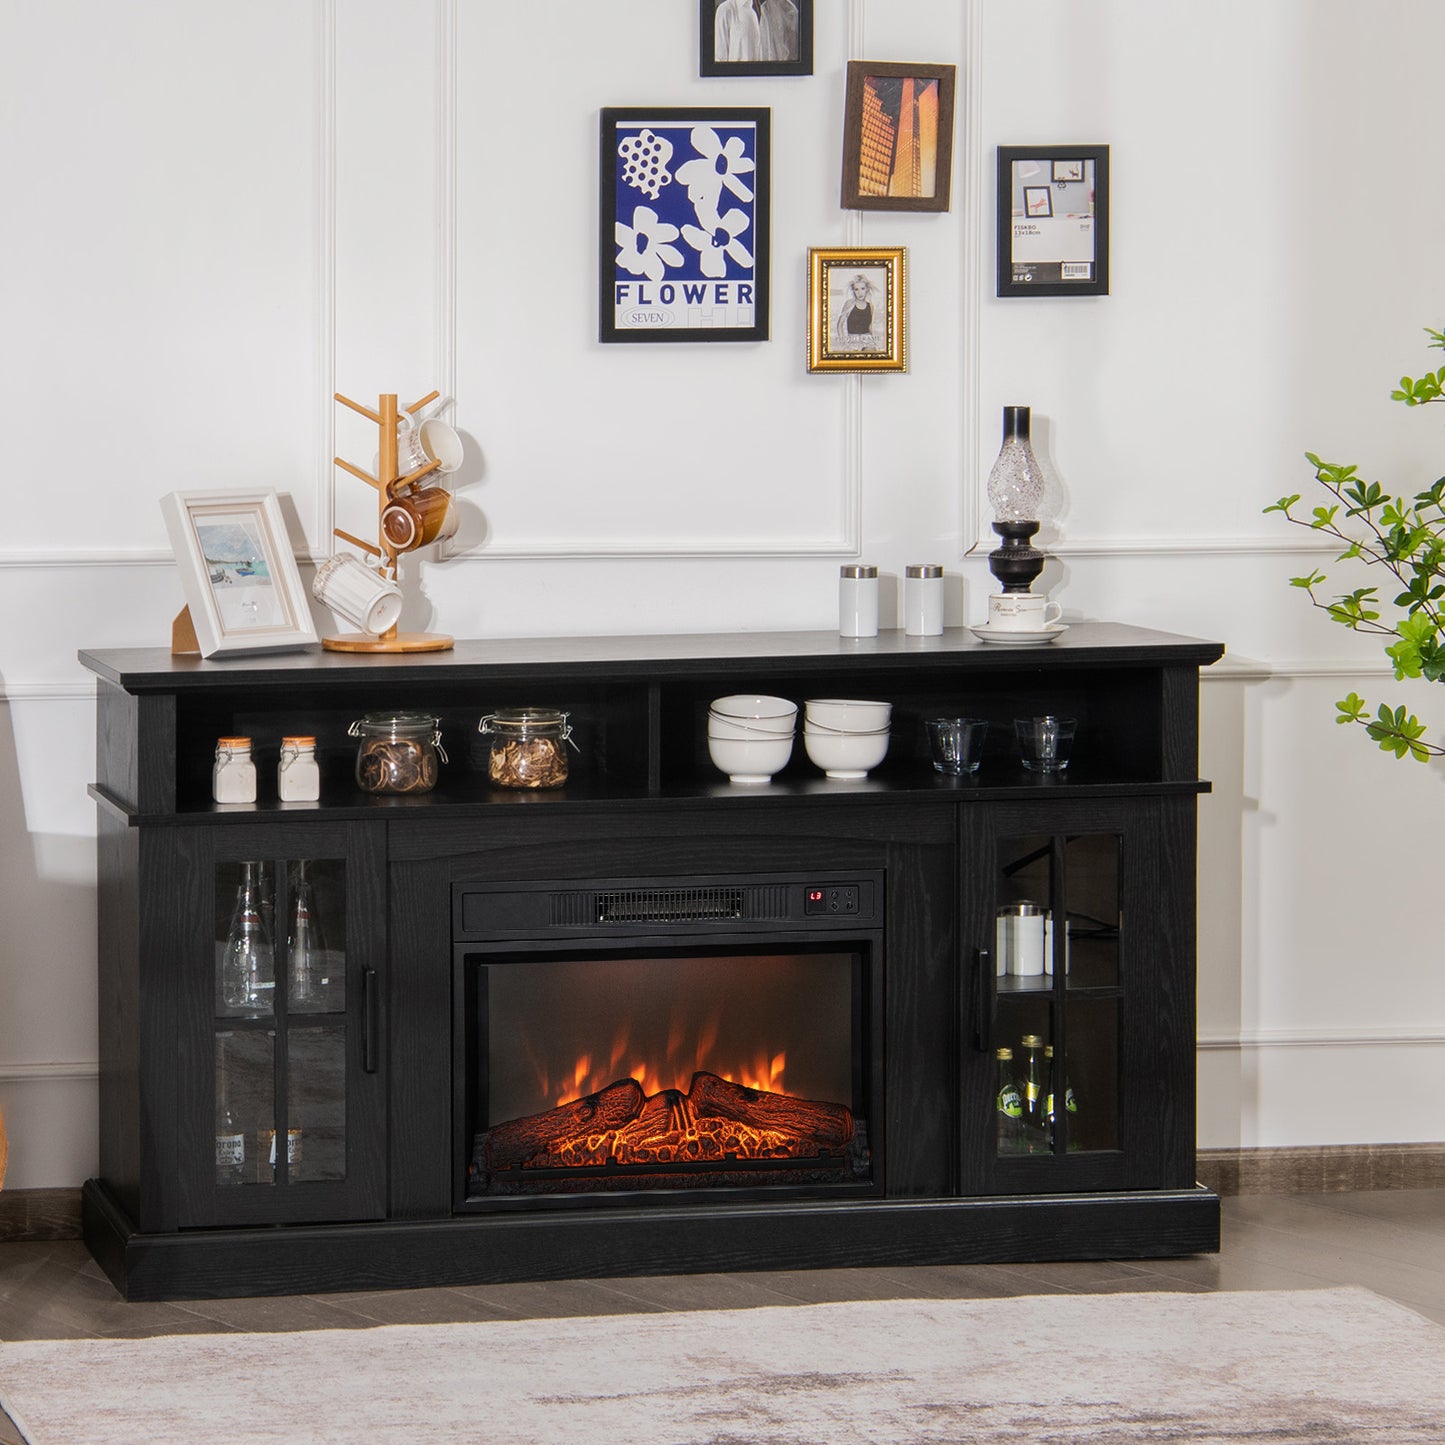 Fireplace TV Stand with 1400W Electric Fireplace-Black